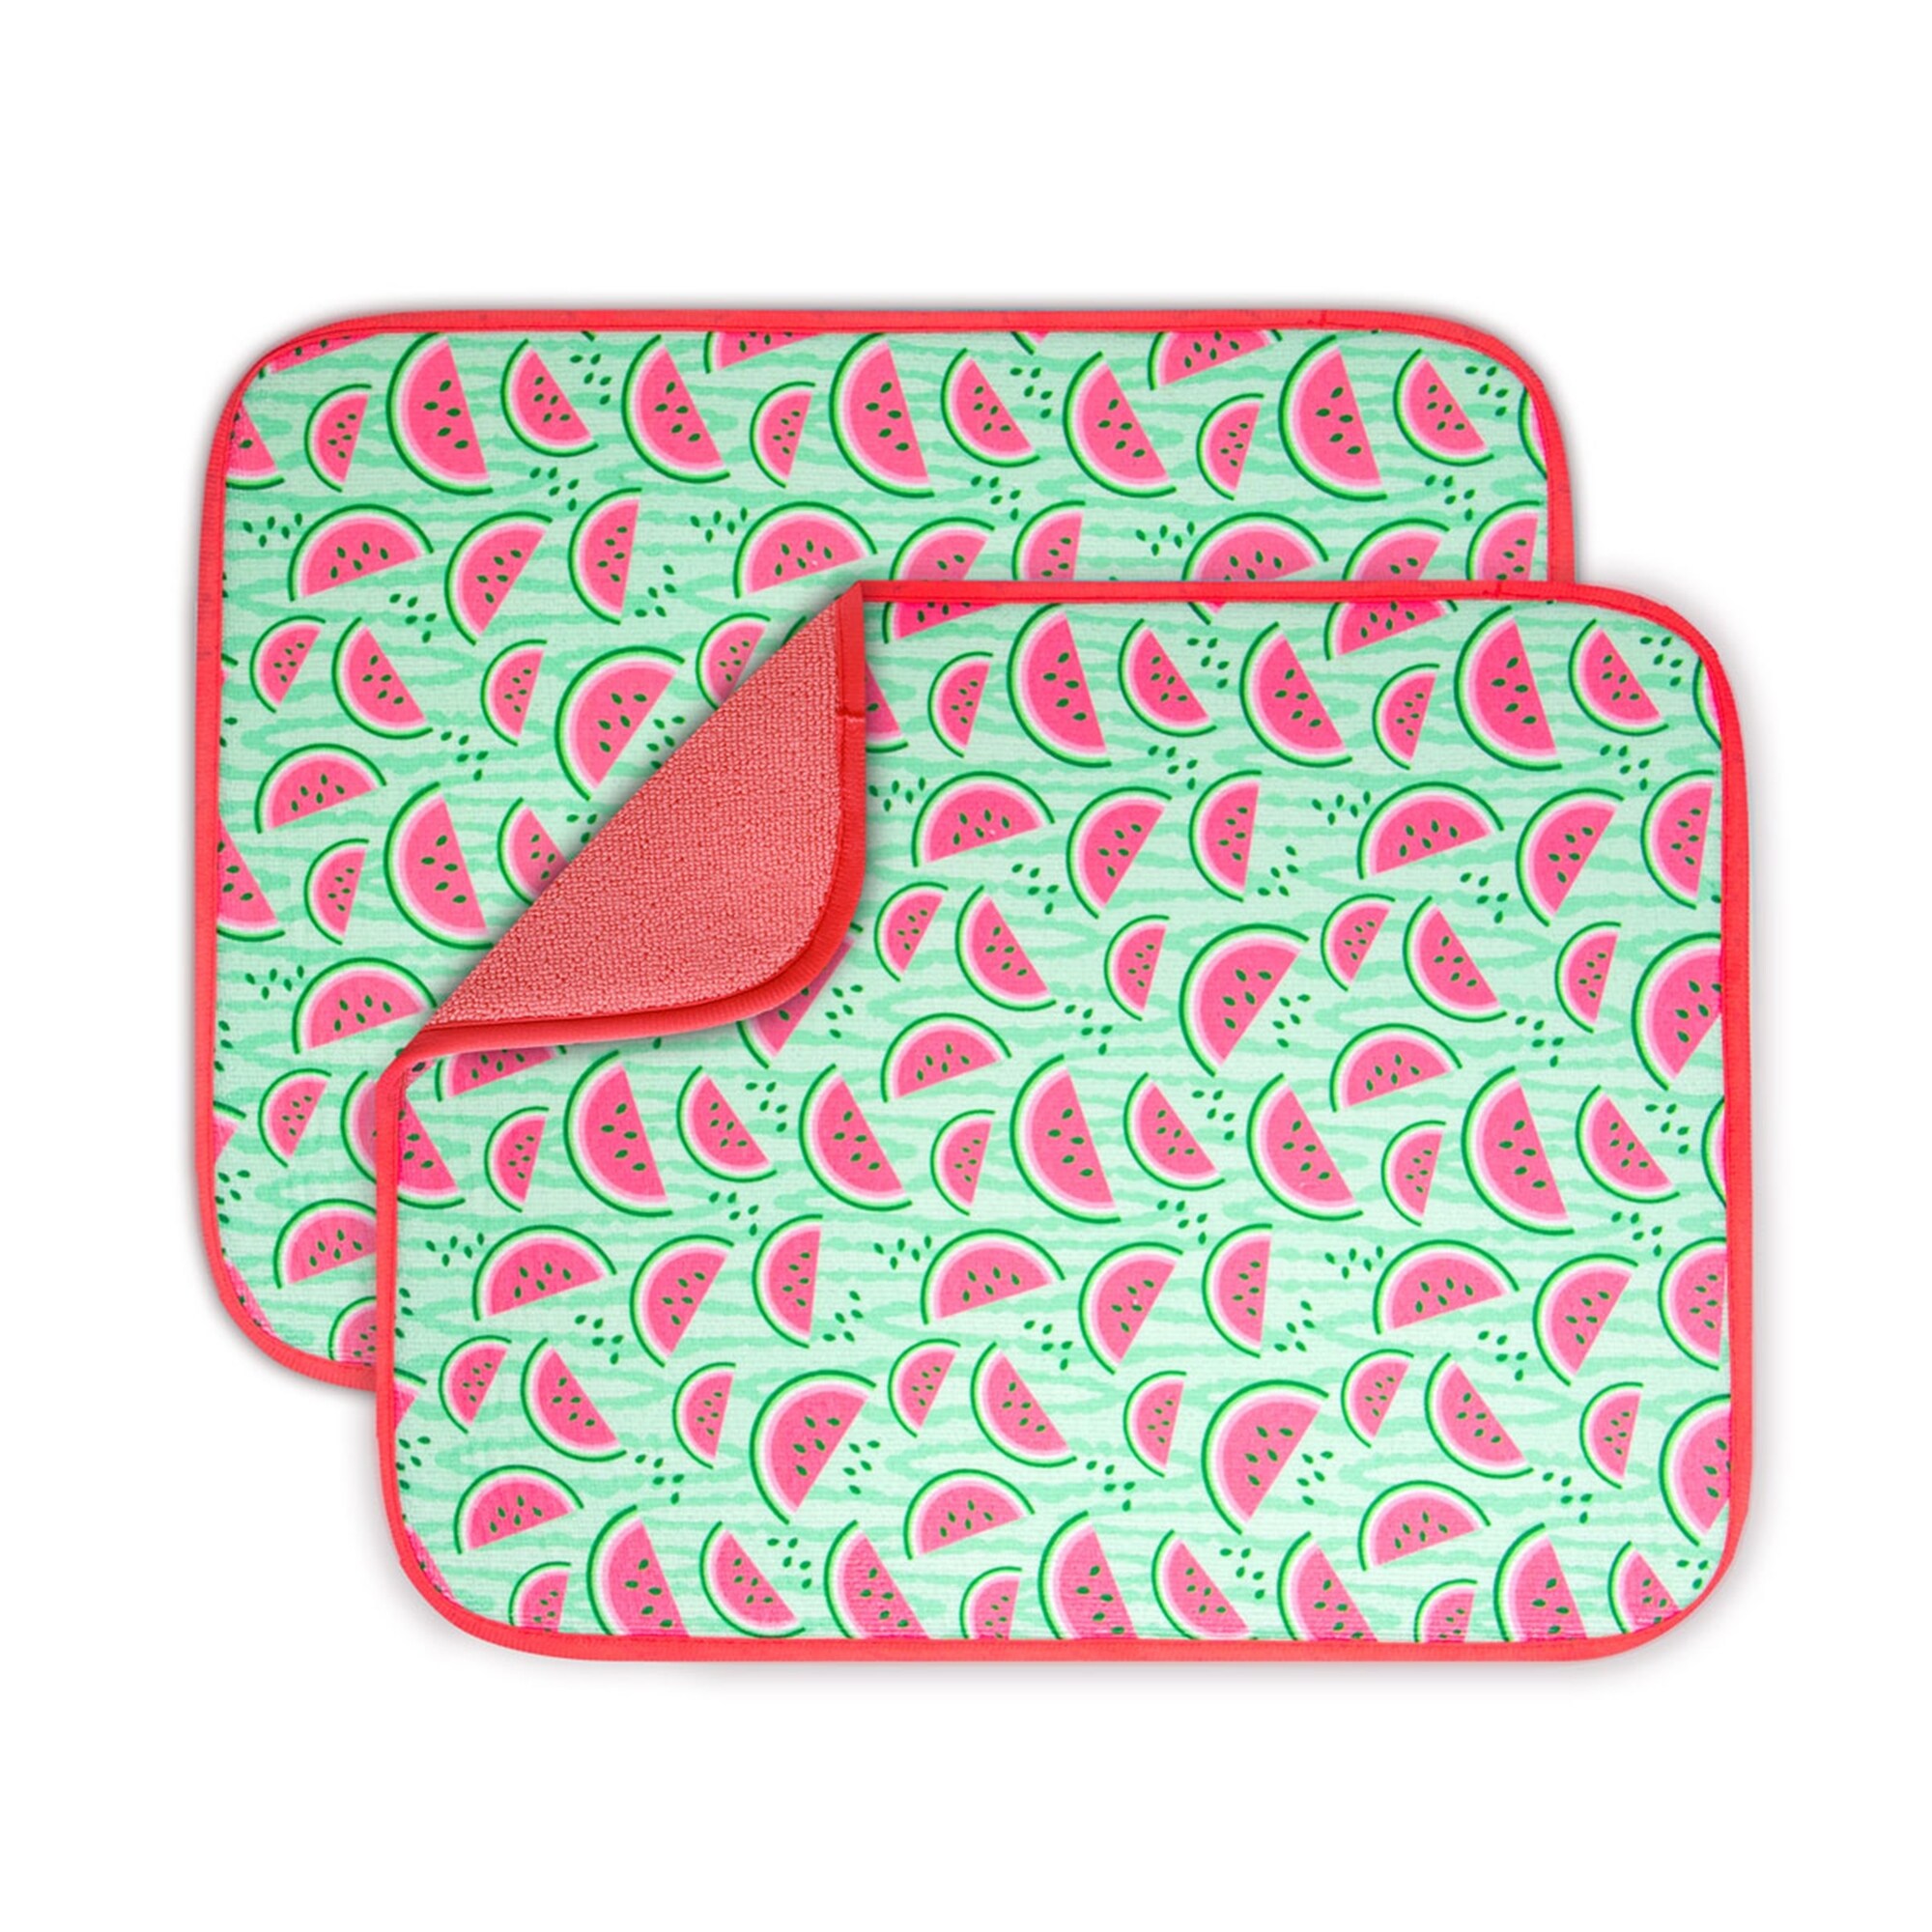 https://ak1.ostkcdn.com/images/products/is/images/direct/ce1b66fc9625a92c42b2b5978198a14eac4f352d/Reversible-Dish-Drying-Mat-2-Pk%2C-Watermelon.jpg